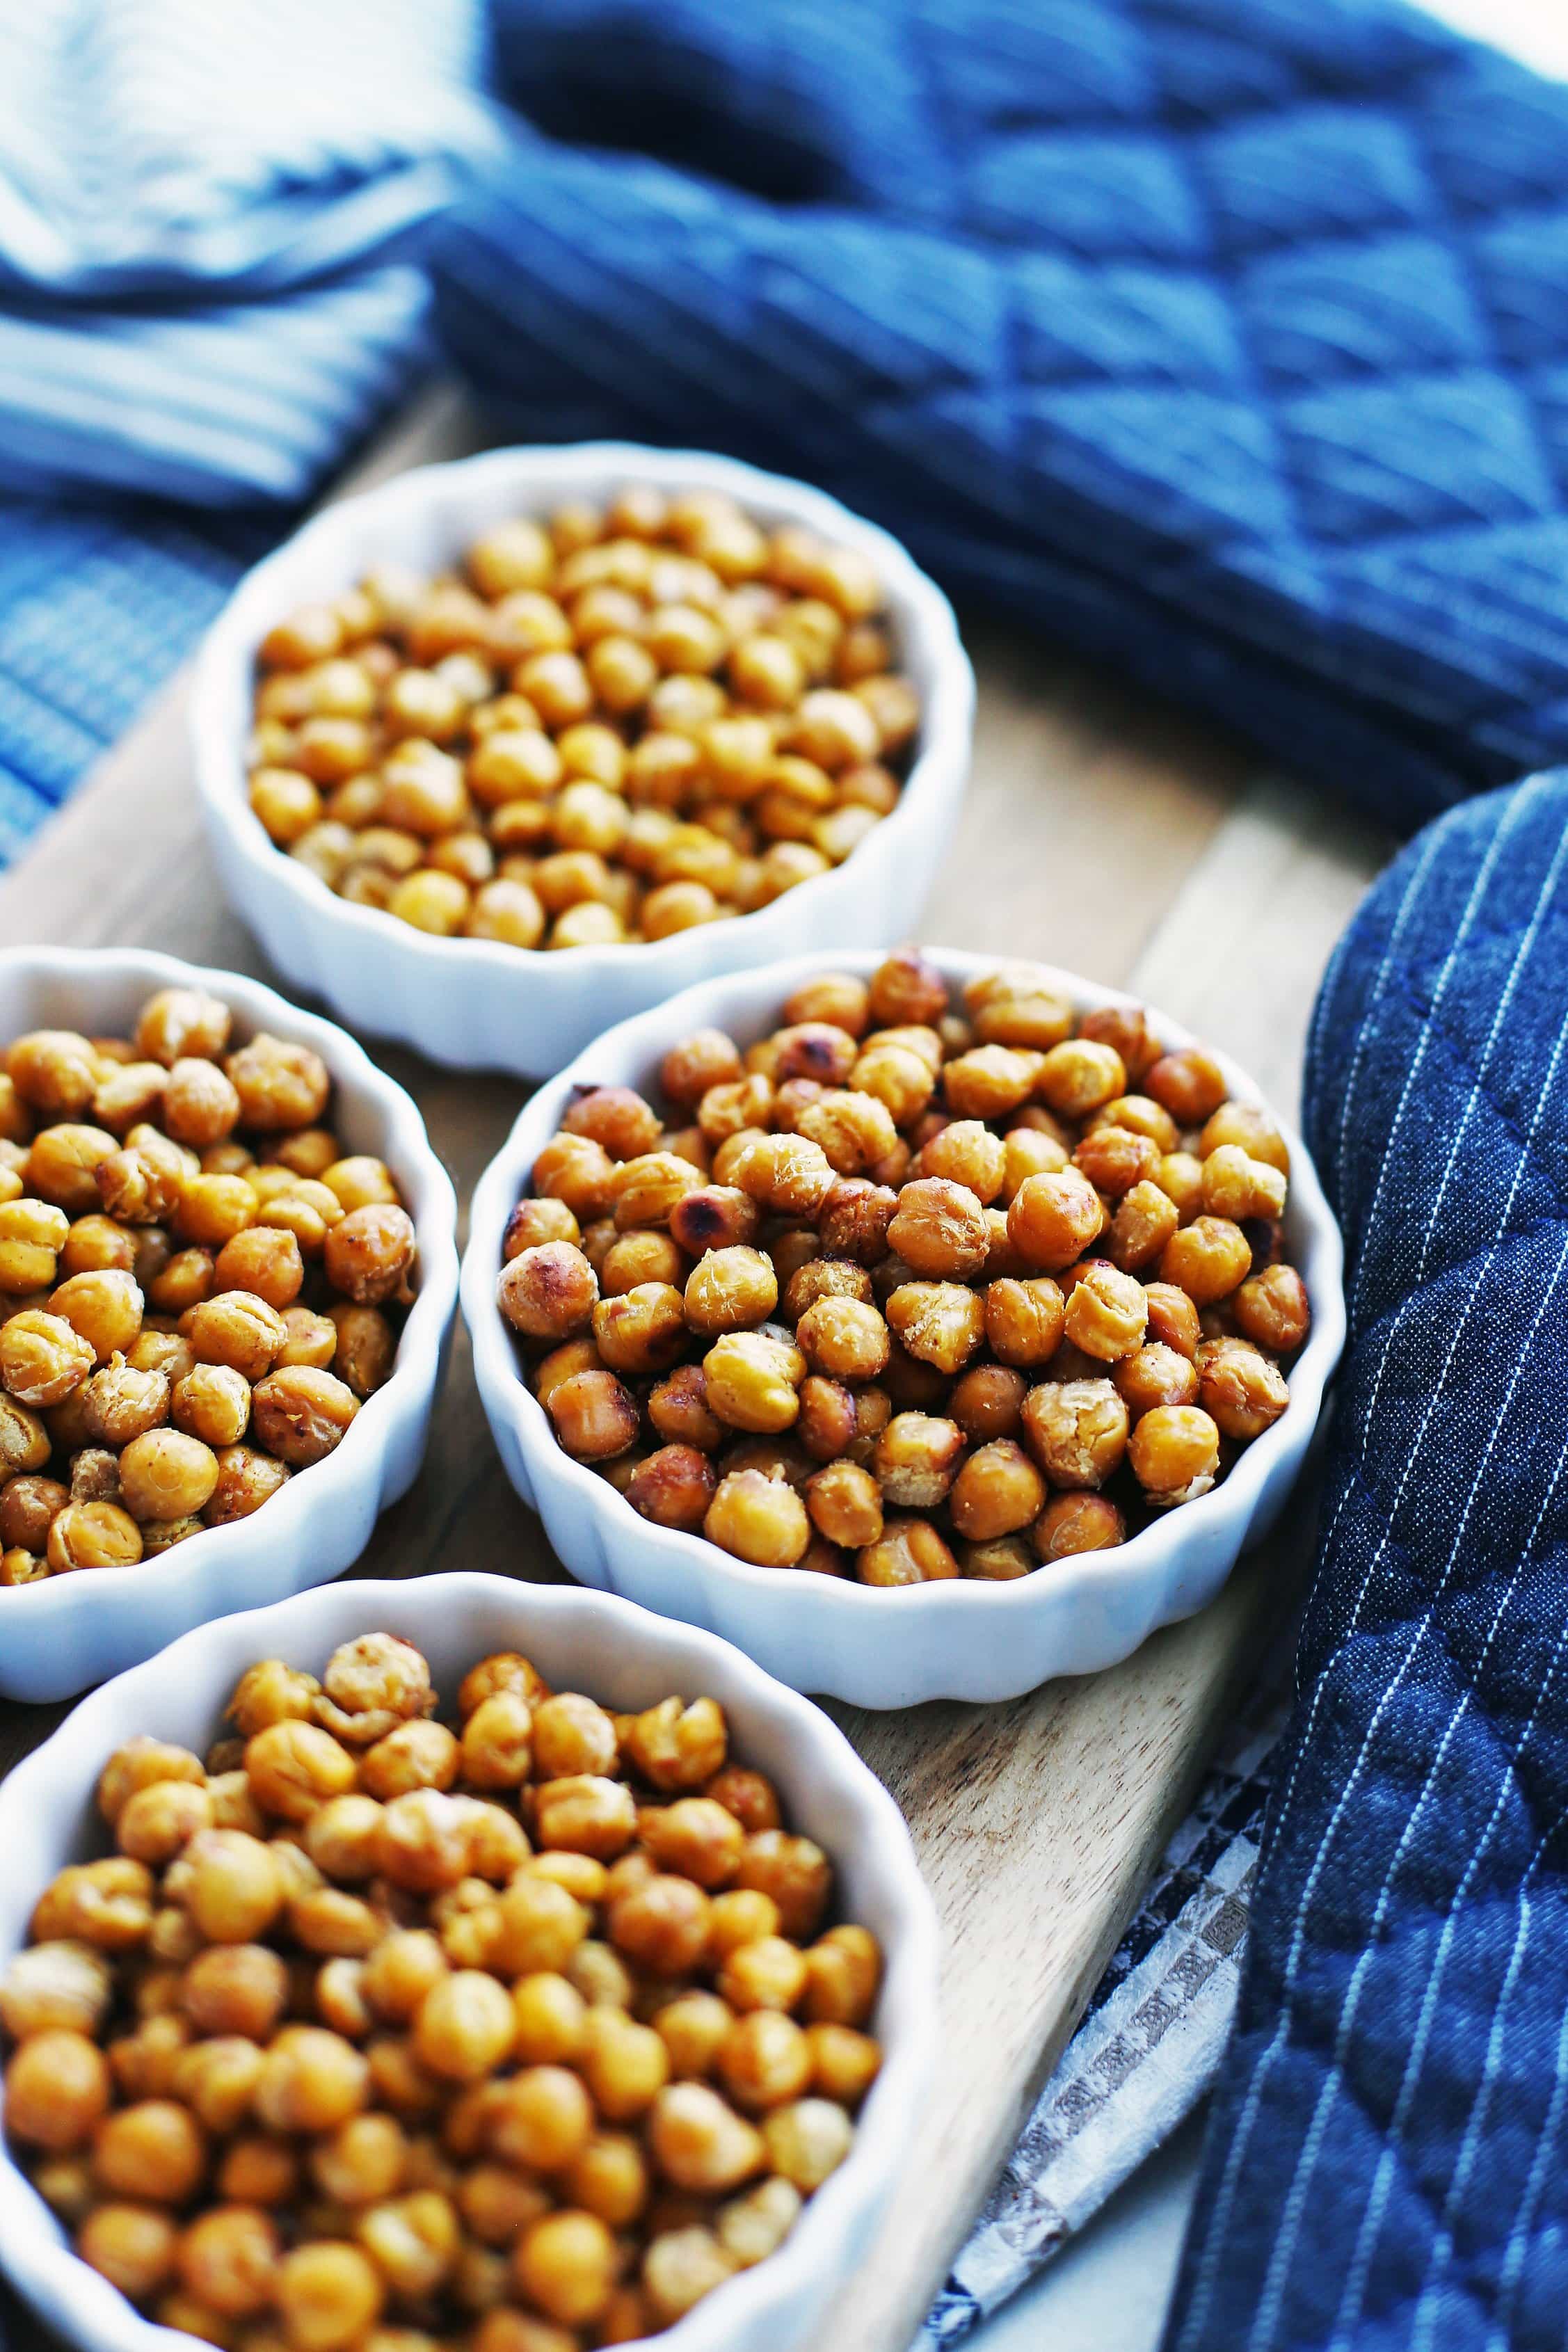 Honey garlic roasted chickpeas in a mini porcelain tart pan surrounded by three other tart pans containing assorted seasoned roasted chickpeas.